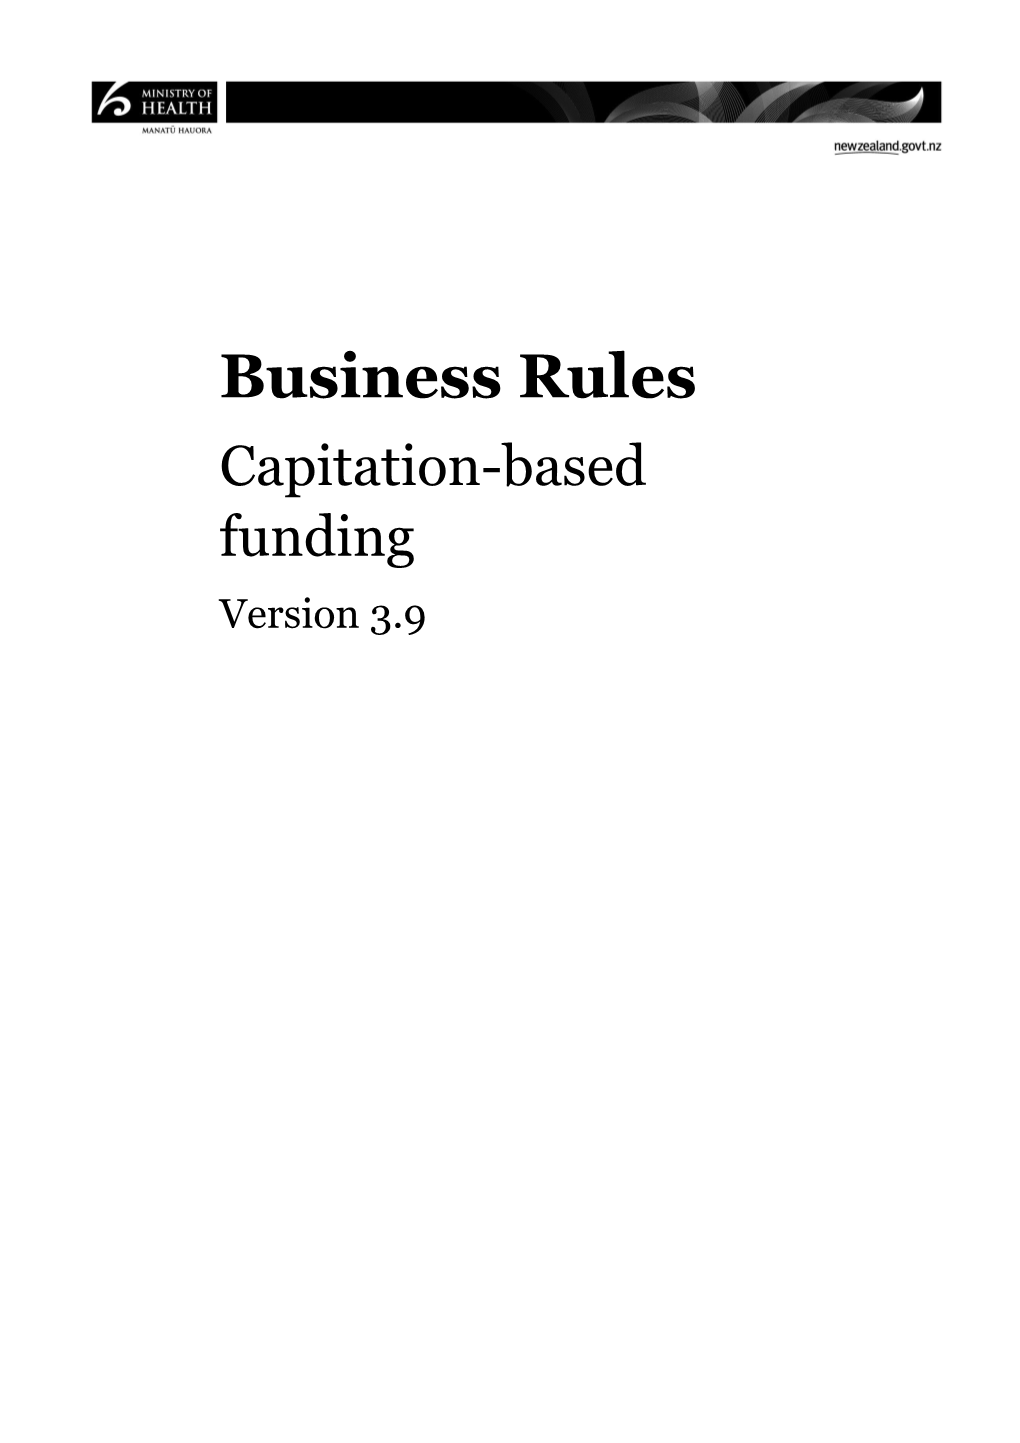 Citation: Ministry of Health. 2013. Business Rules: Capitation-Based Funding